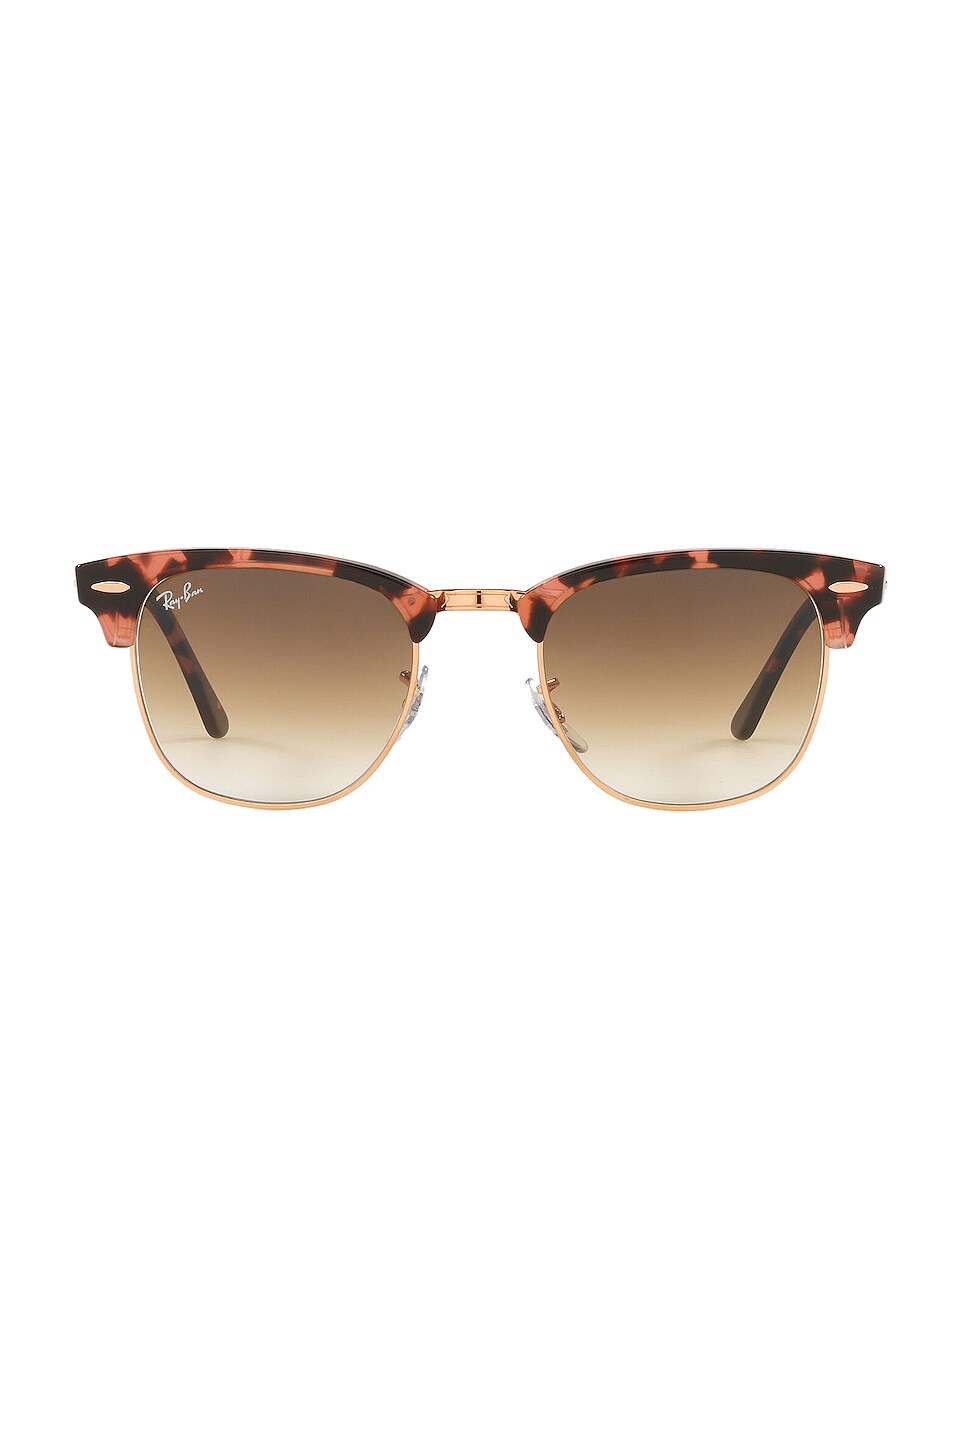 Ray-Ban Clubmaster Sunglasses in Pink Havana | REVOLVE